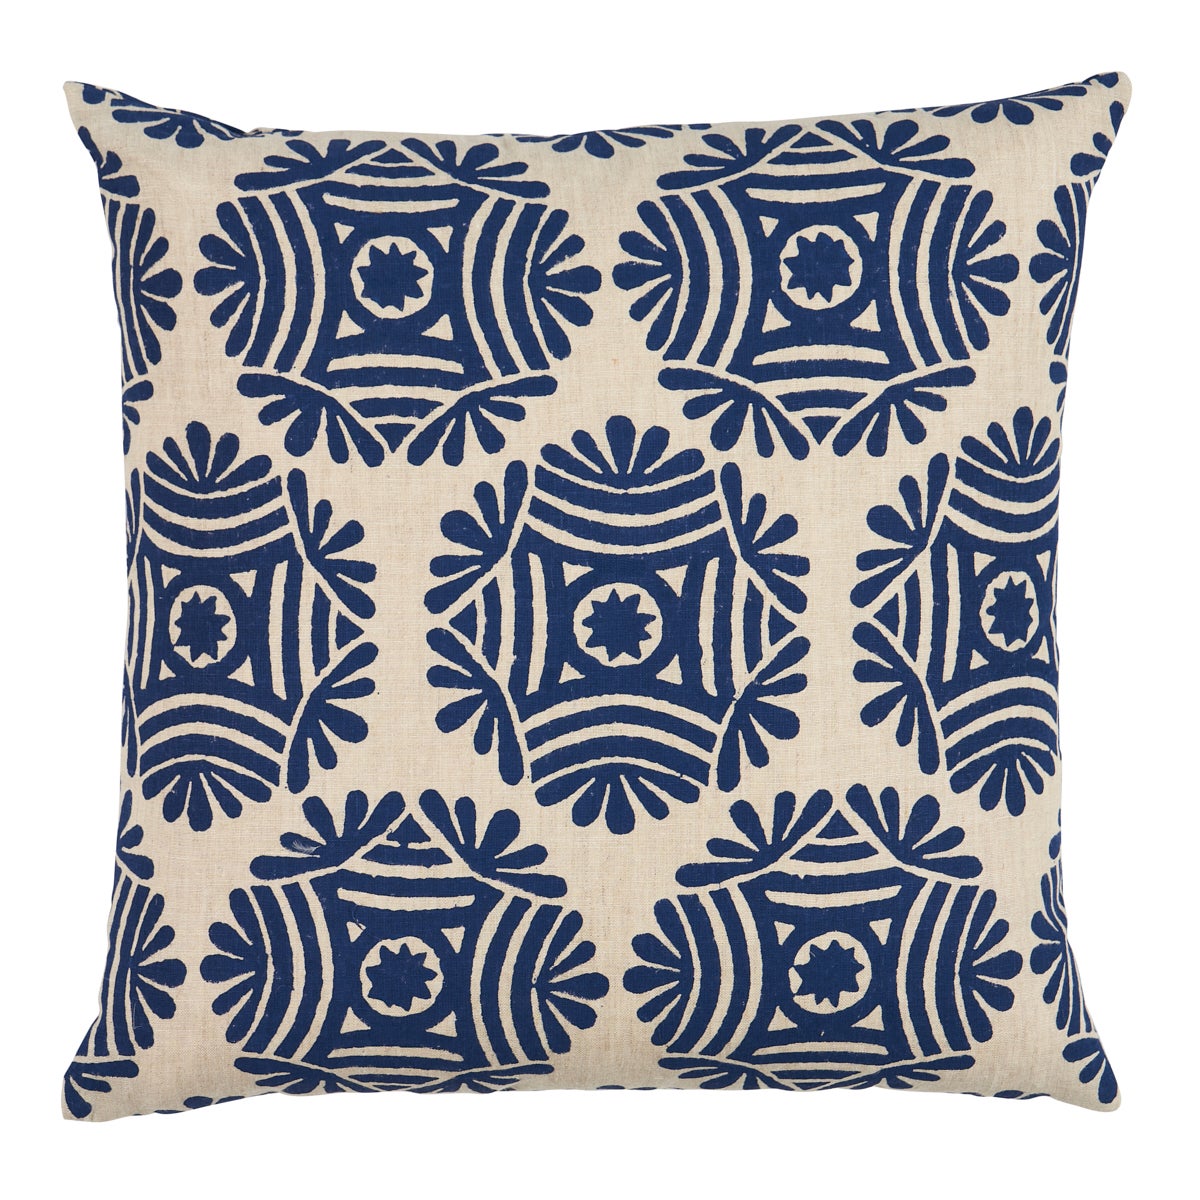 Gilded Star Block Print Pillow in Navy on Natural, 20"